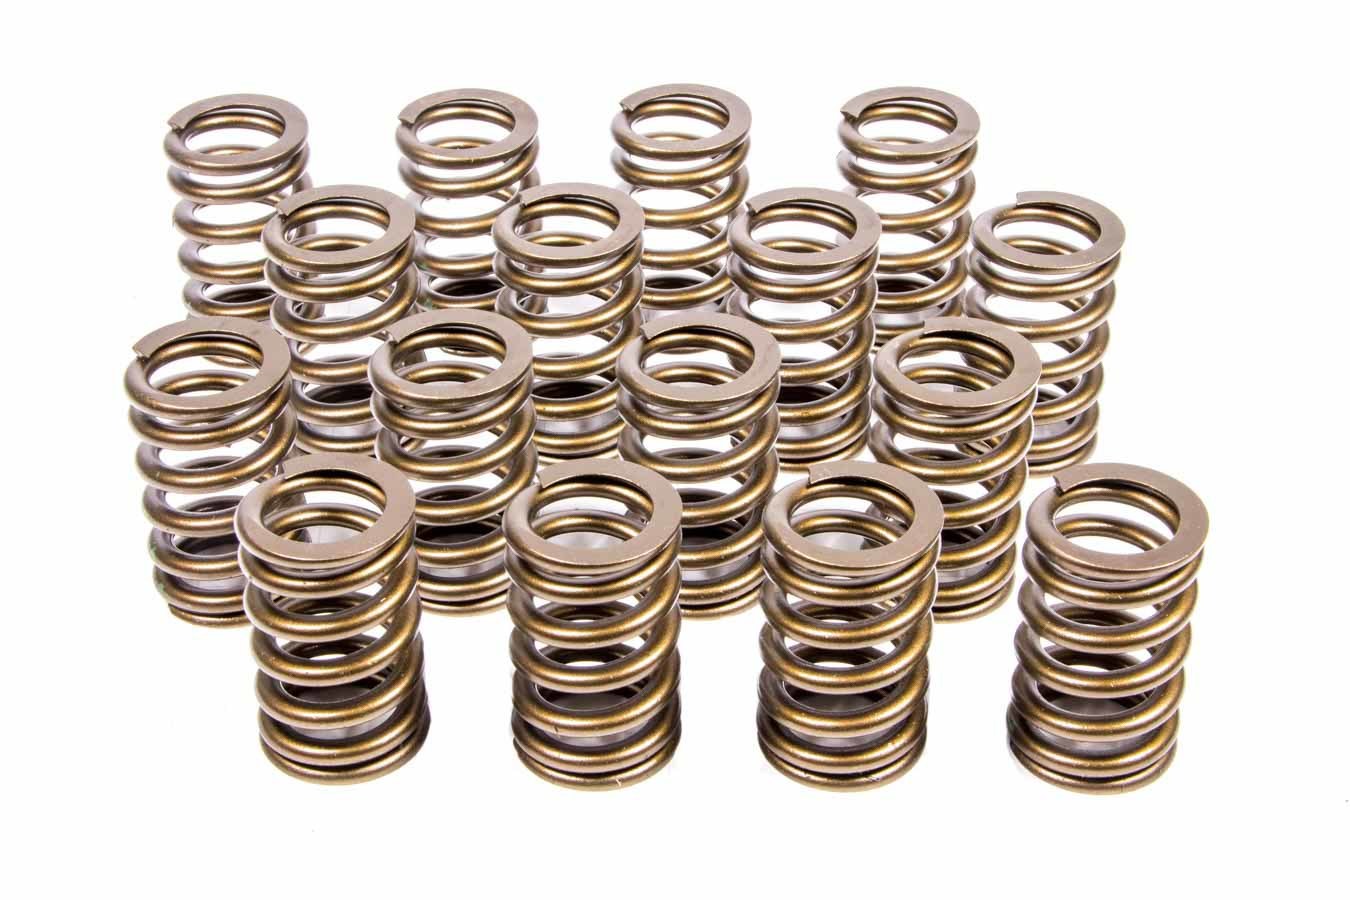 Crower Cams 68135-16 Valve Spring, Single Spring, 1.355 in OD, Small Block Chevy, Set of 16